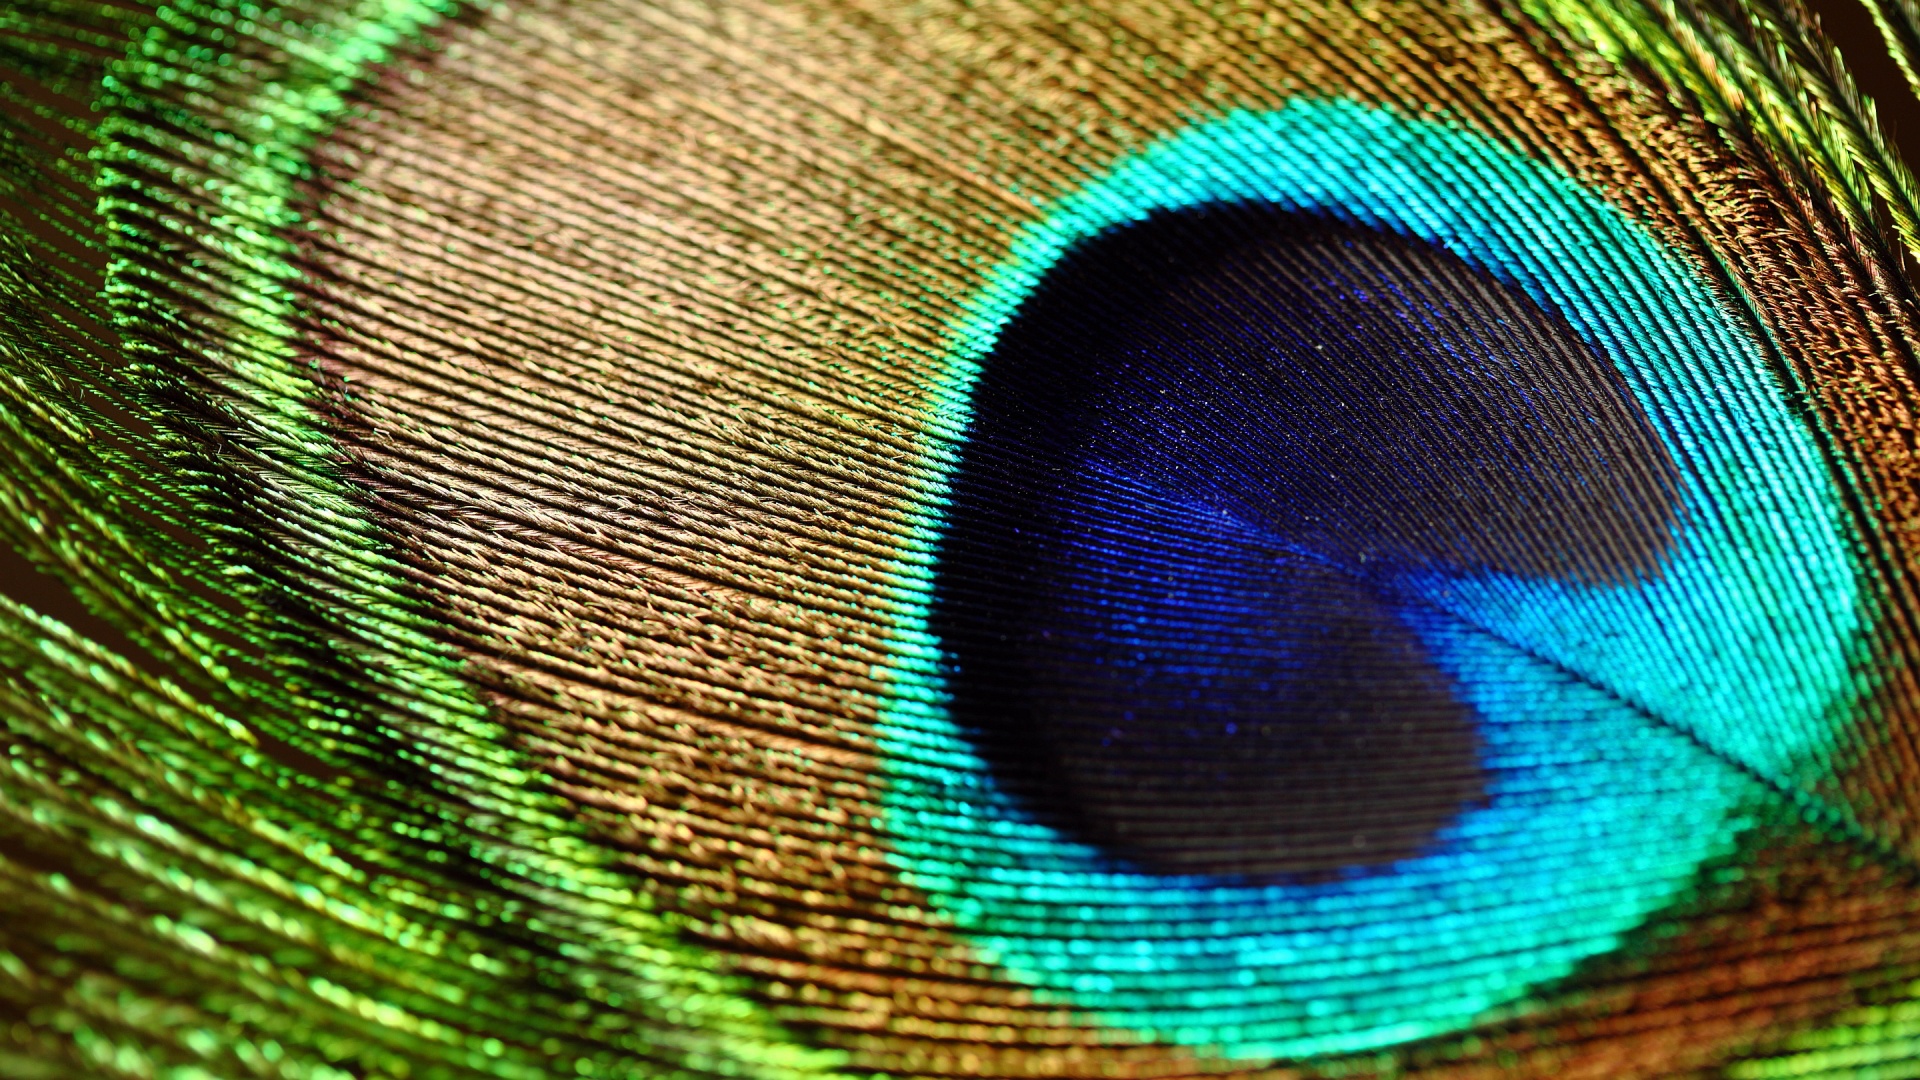 Peacock Feathers Wallpaper Live HD Wallpaper HQ Pictures Images 1920x1080